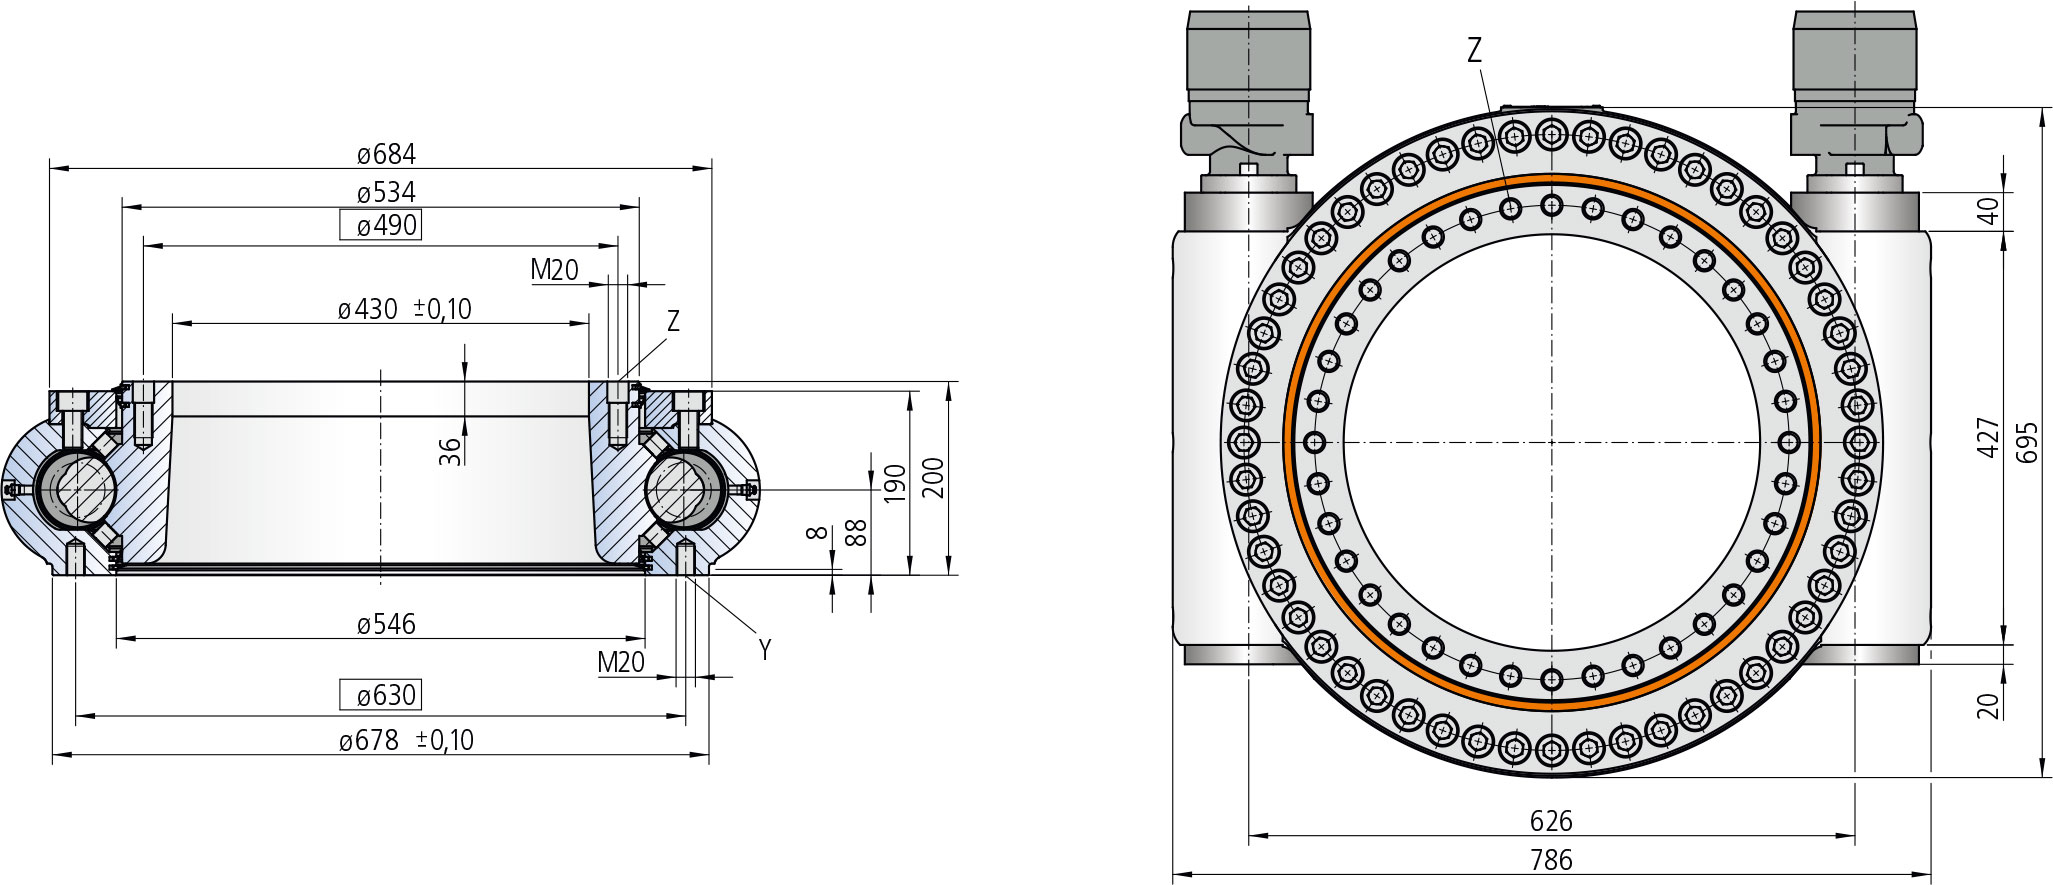 WD-H 0490 / 2 drive WD-H Series cad drawing